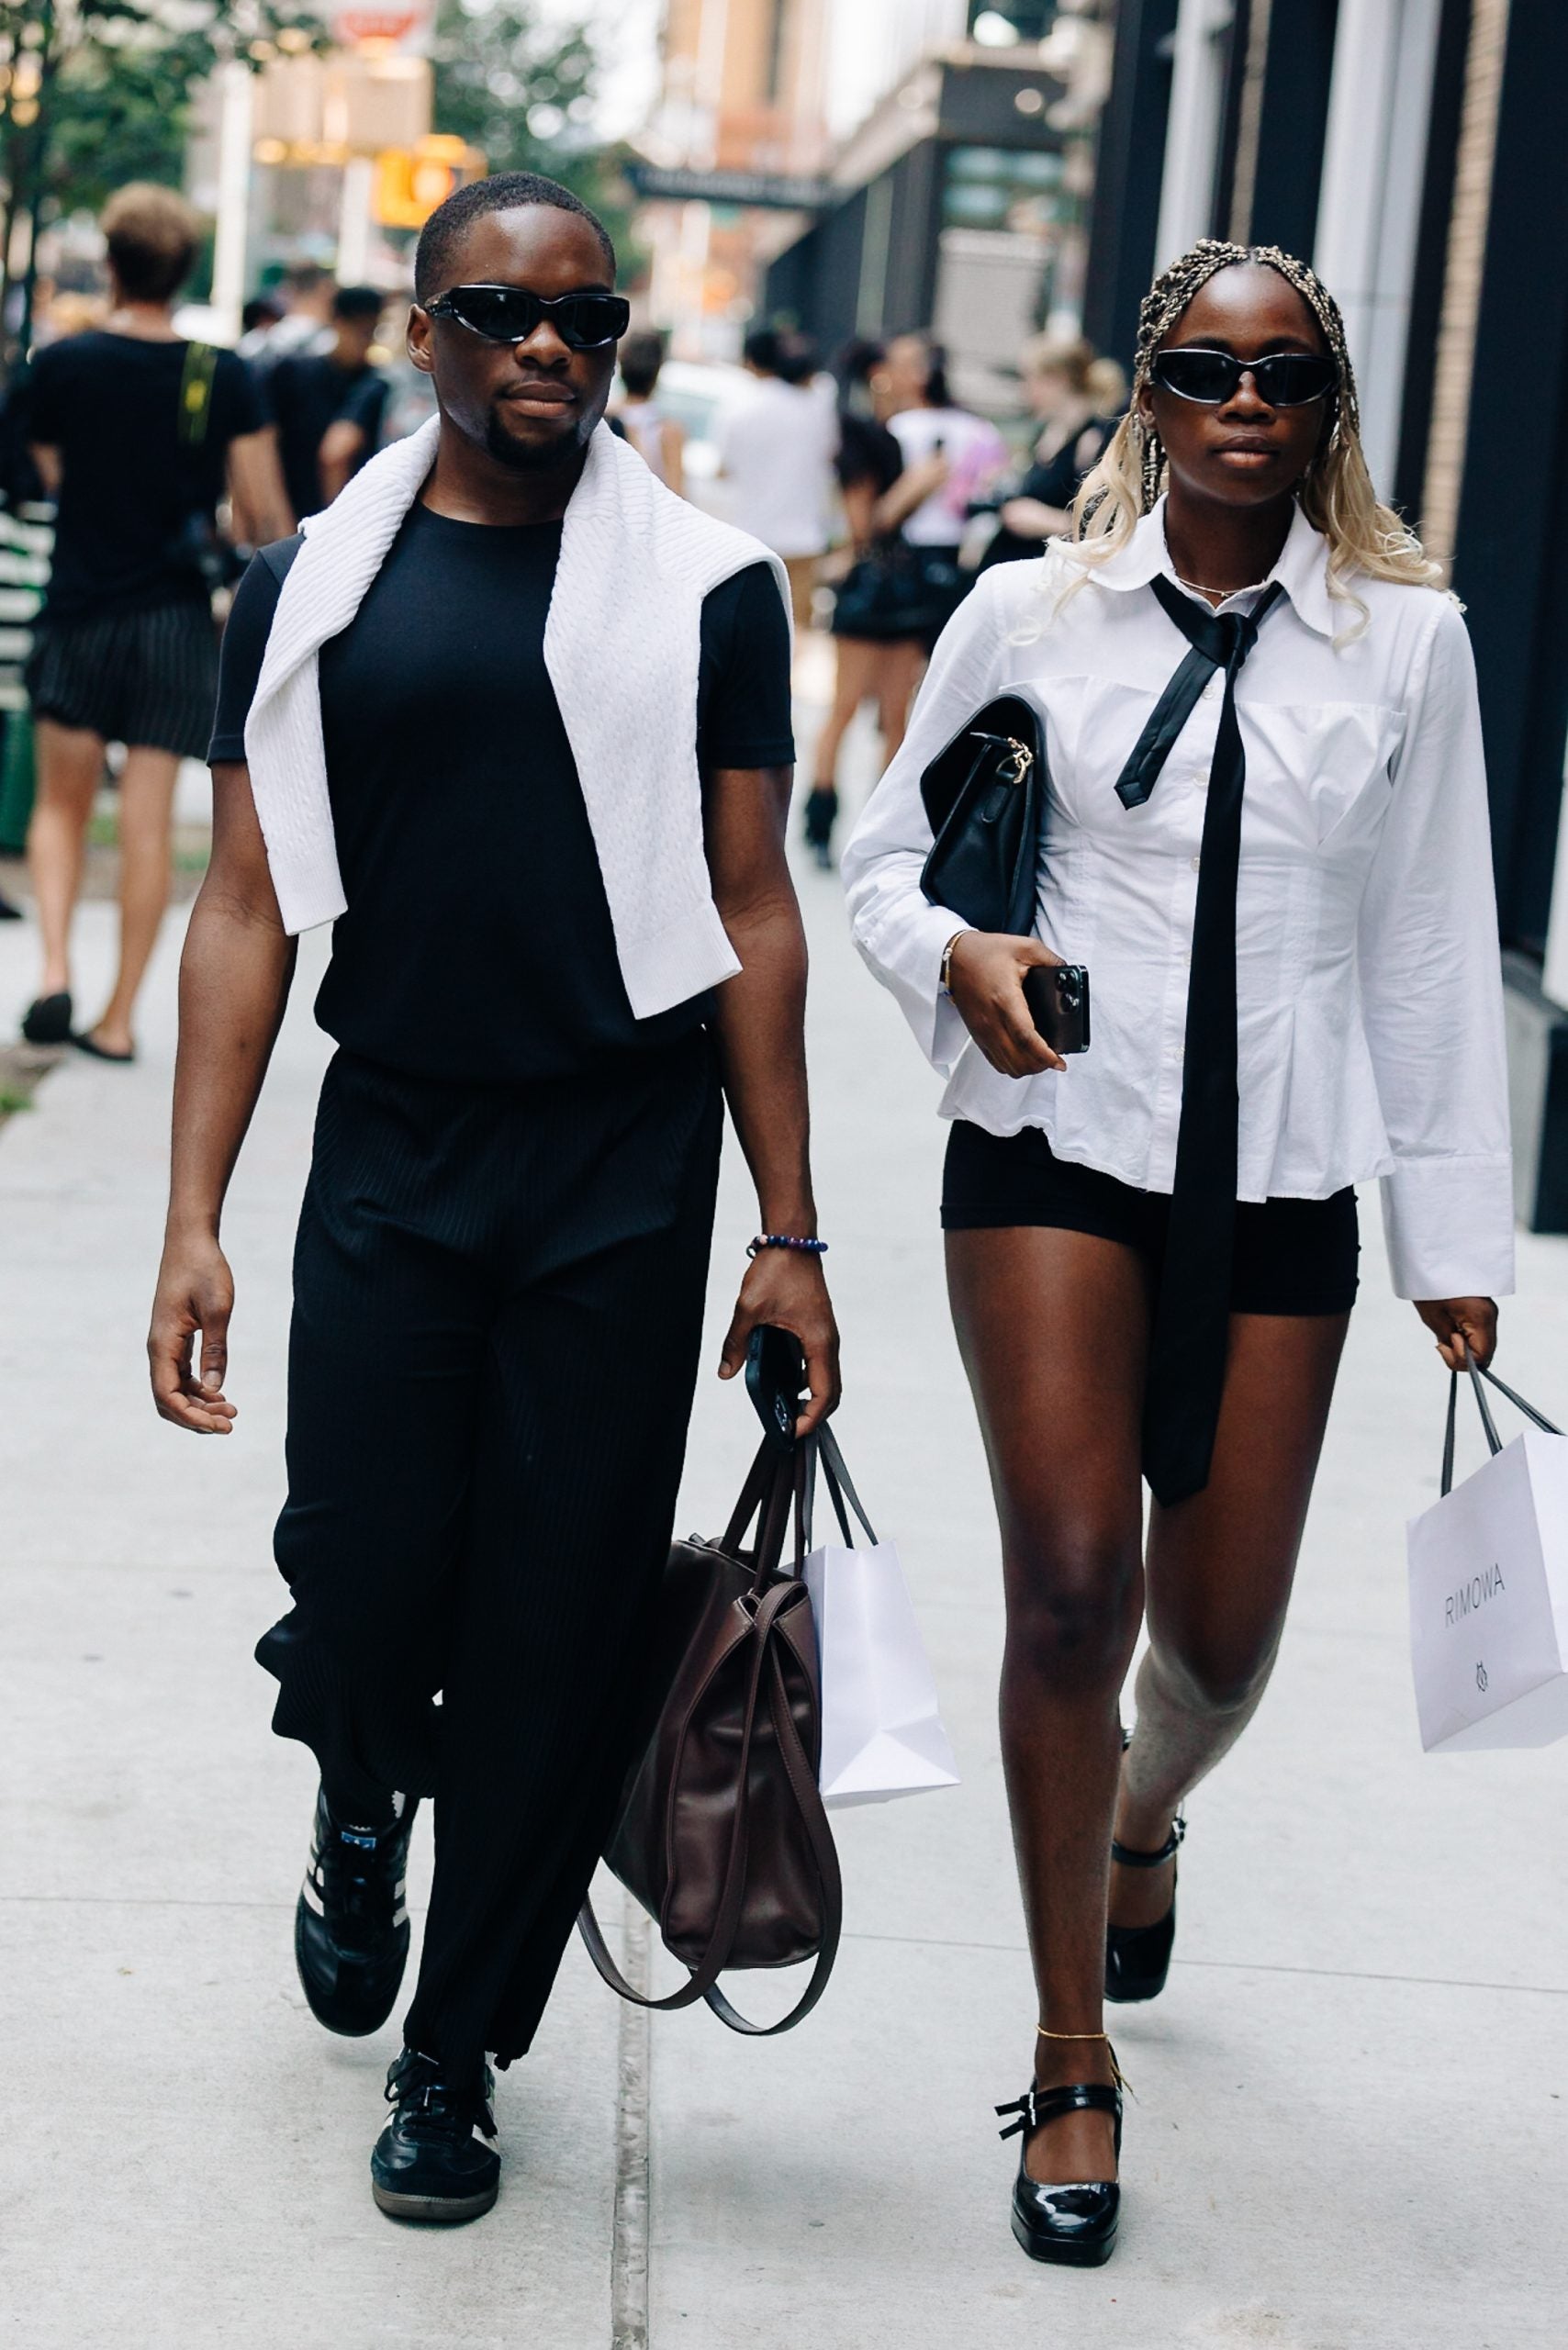 How To Get Noticed by Street Style Photographers at NYFW